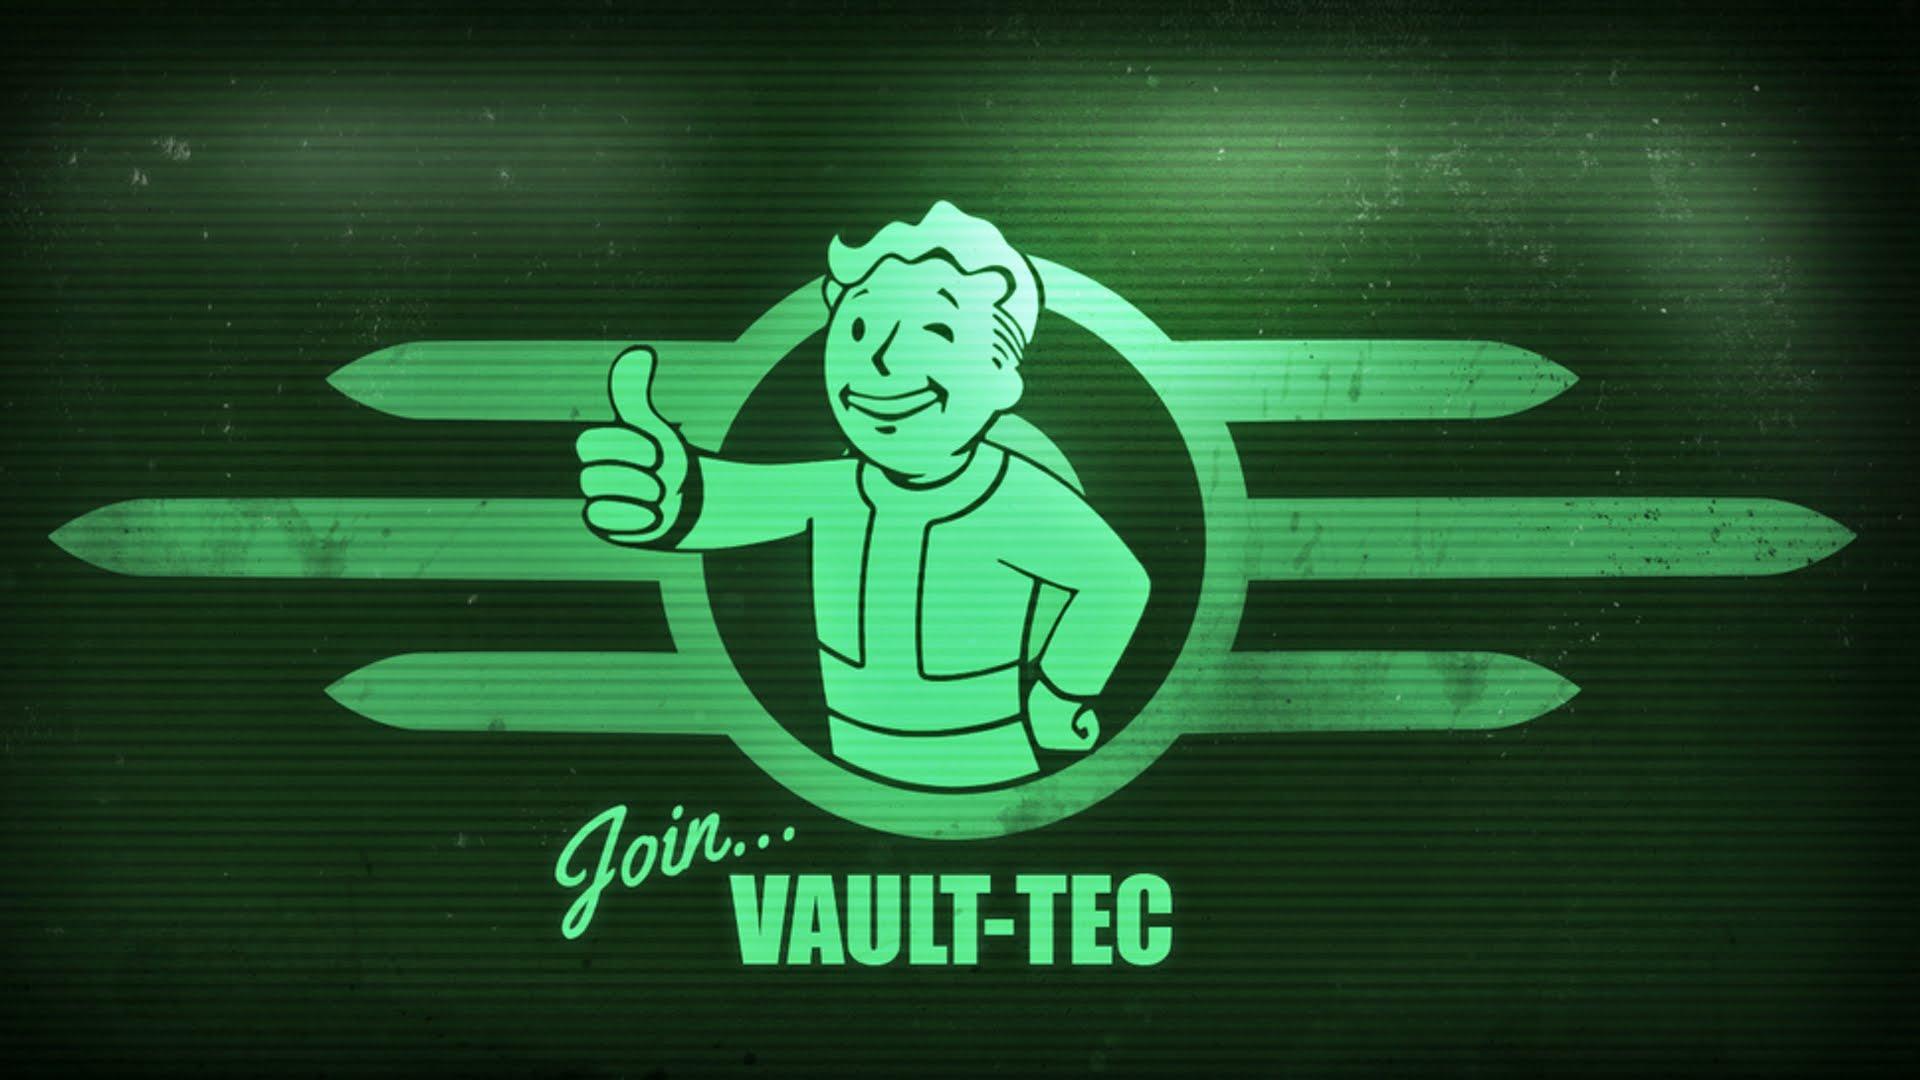 Fallout Iphone Wallpapers Top Free Fallout Iphone Backgrounds Wallpaperaccess